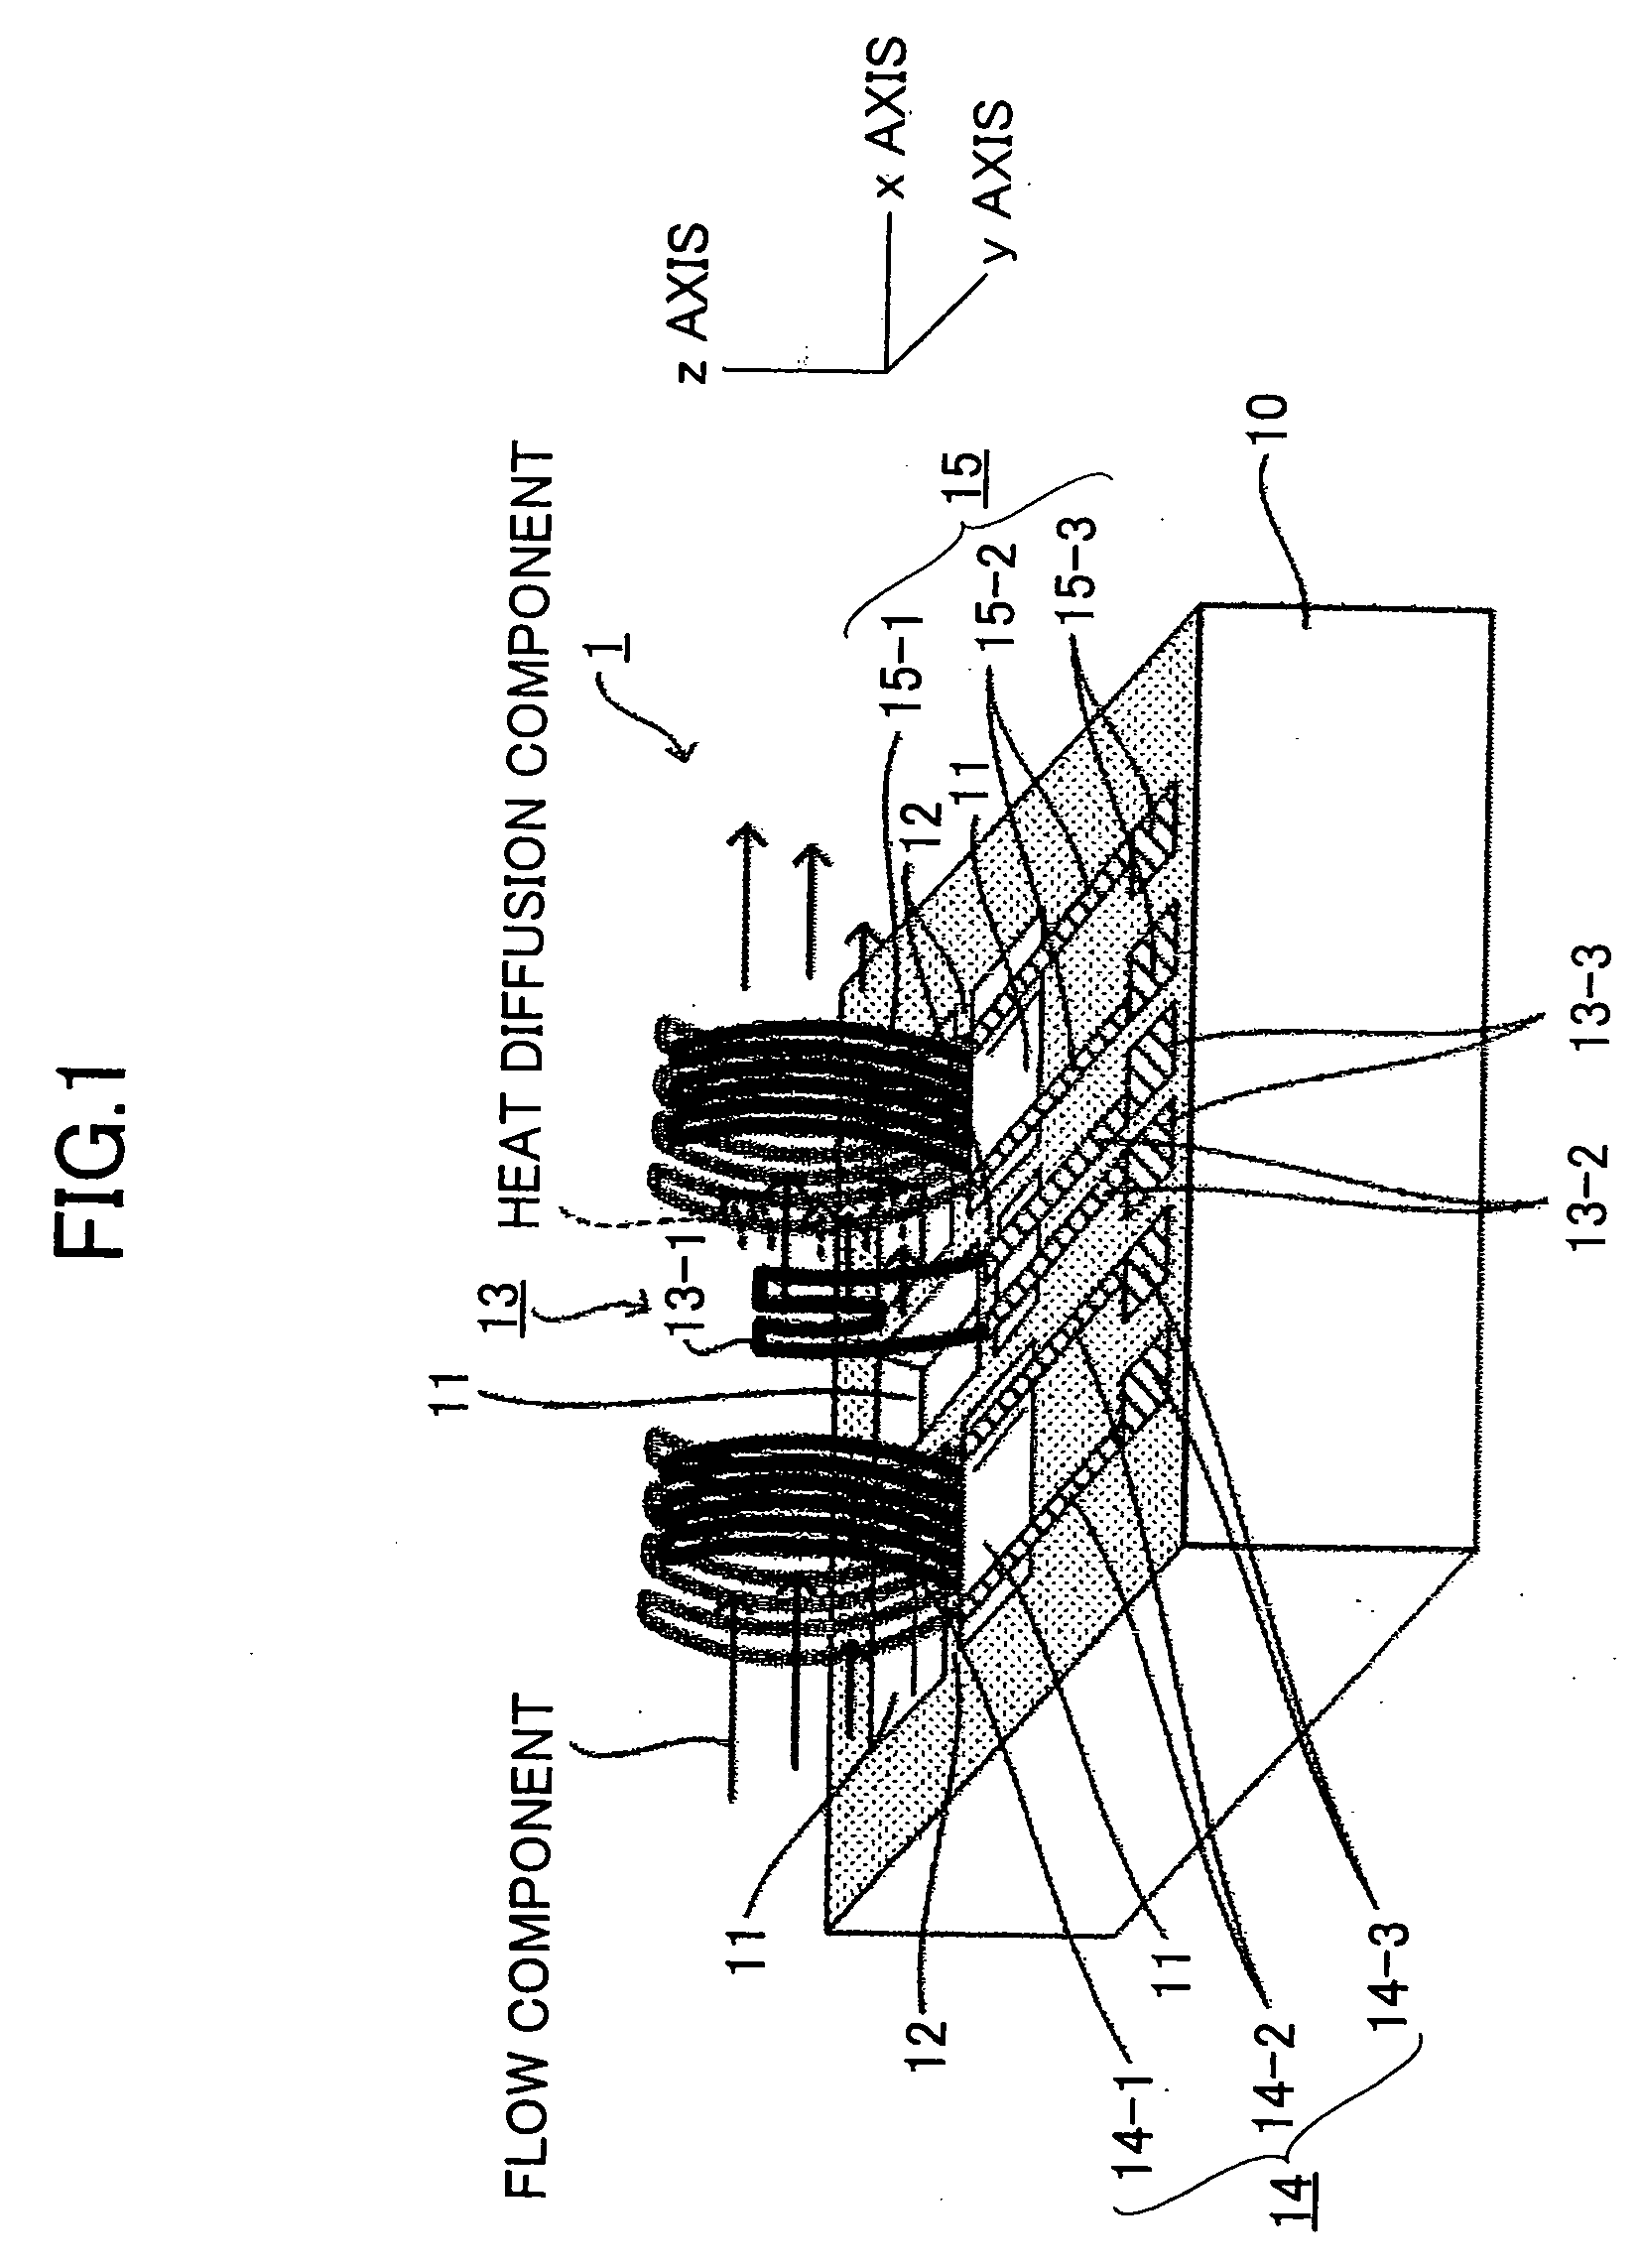 Non-contact condensation detecting method and non-contact condensation detecting apparatus